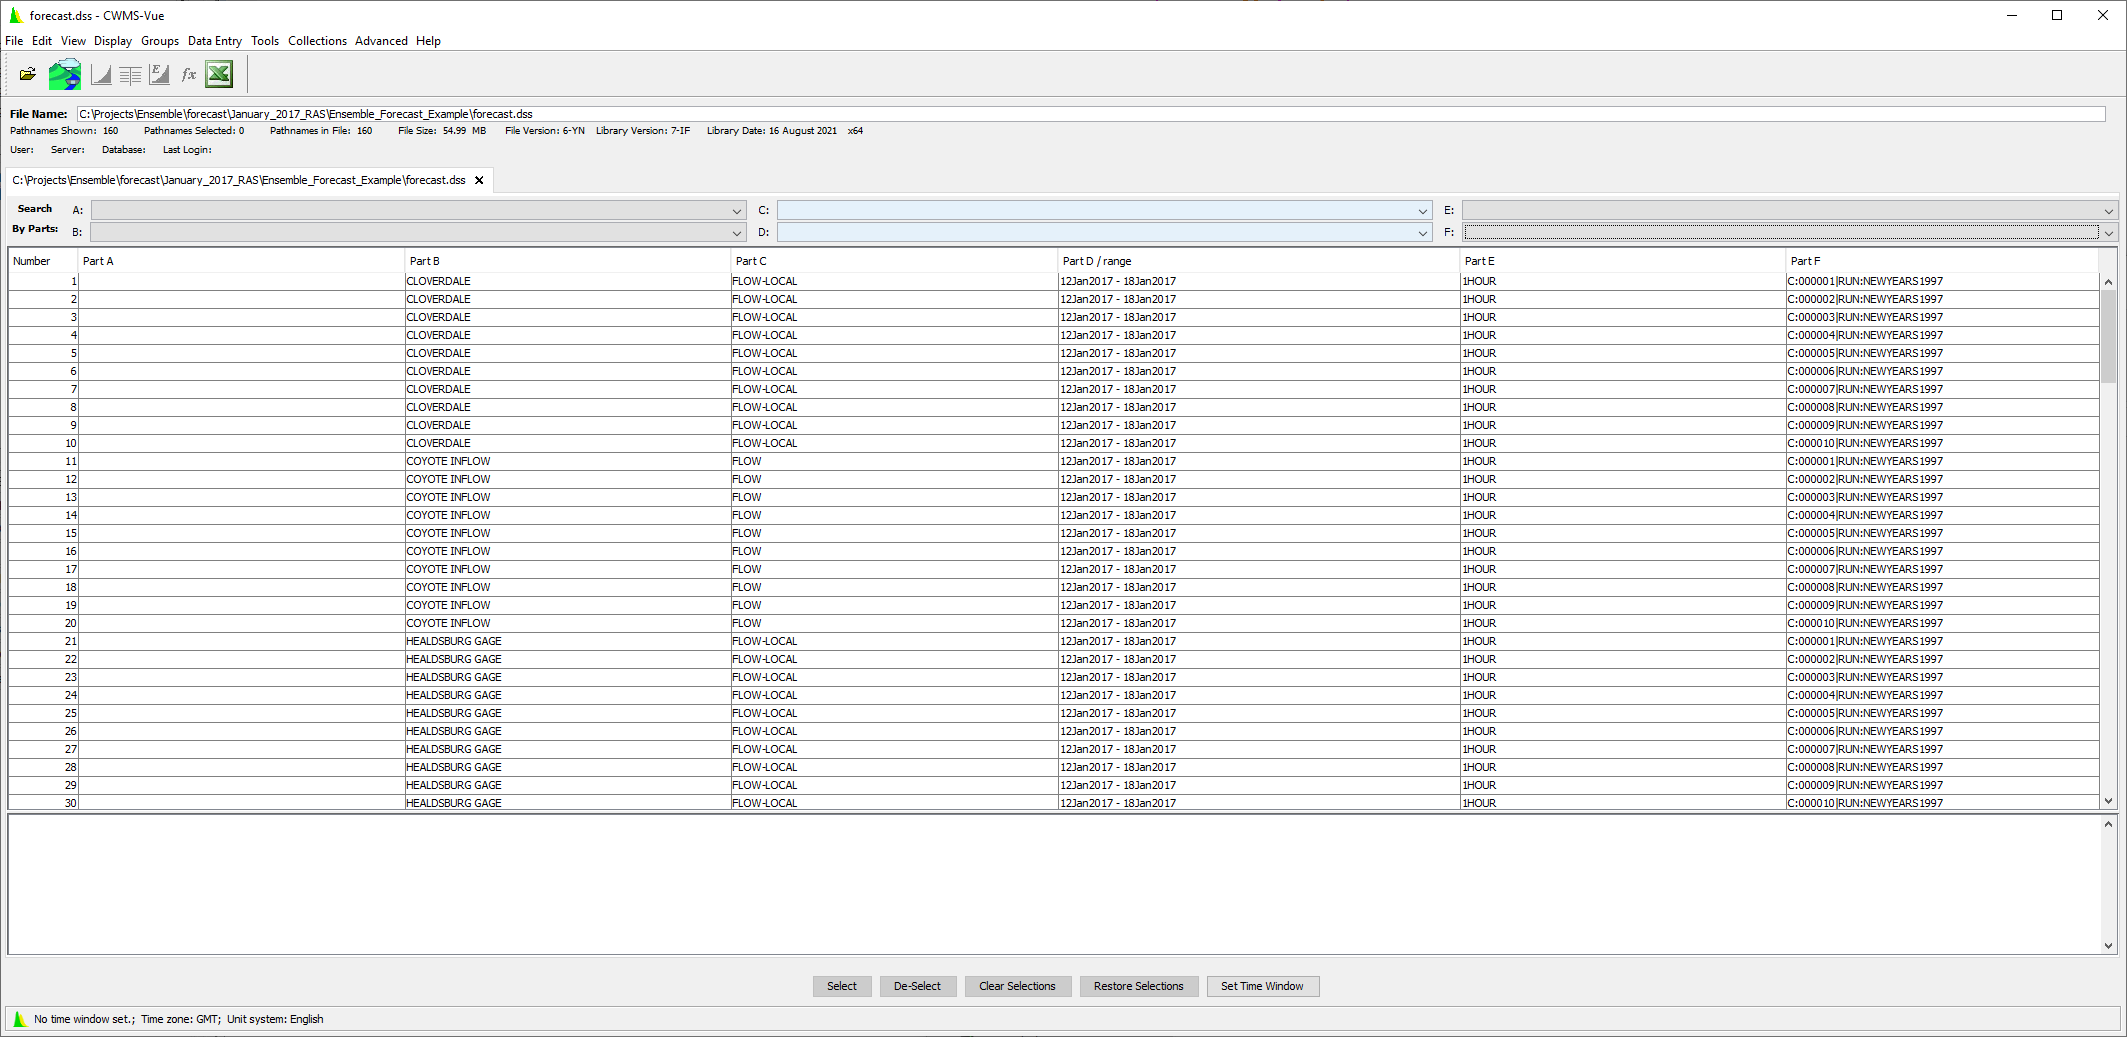 CWMS-Vue - forecast.dss File with Ensemble Collections